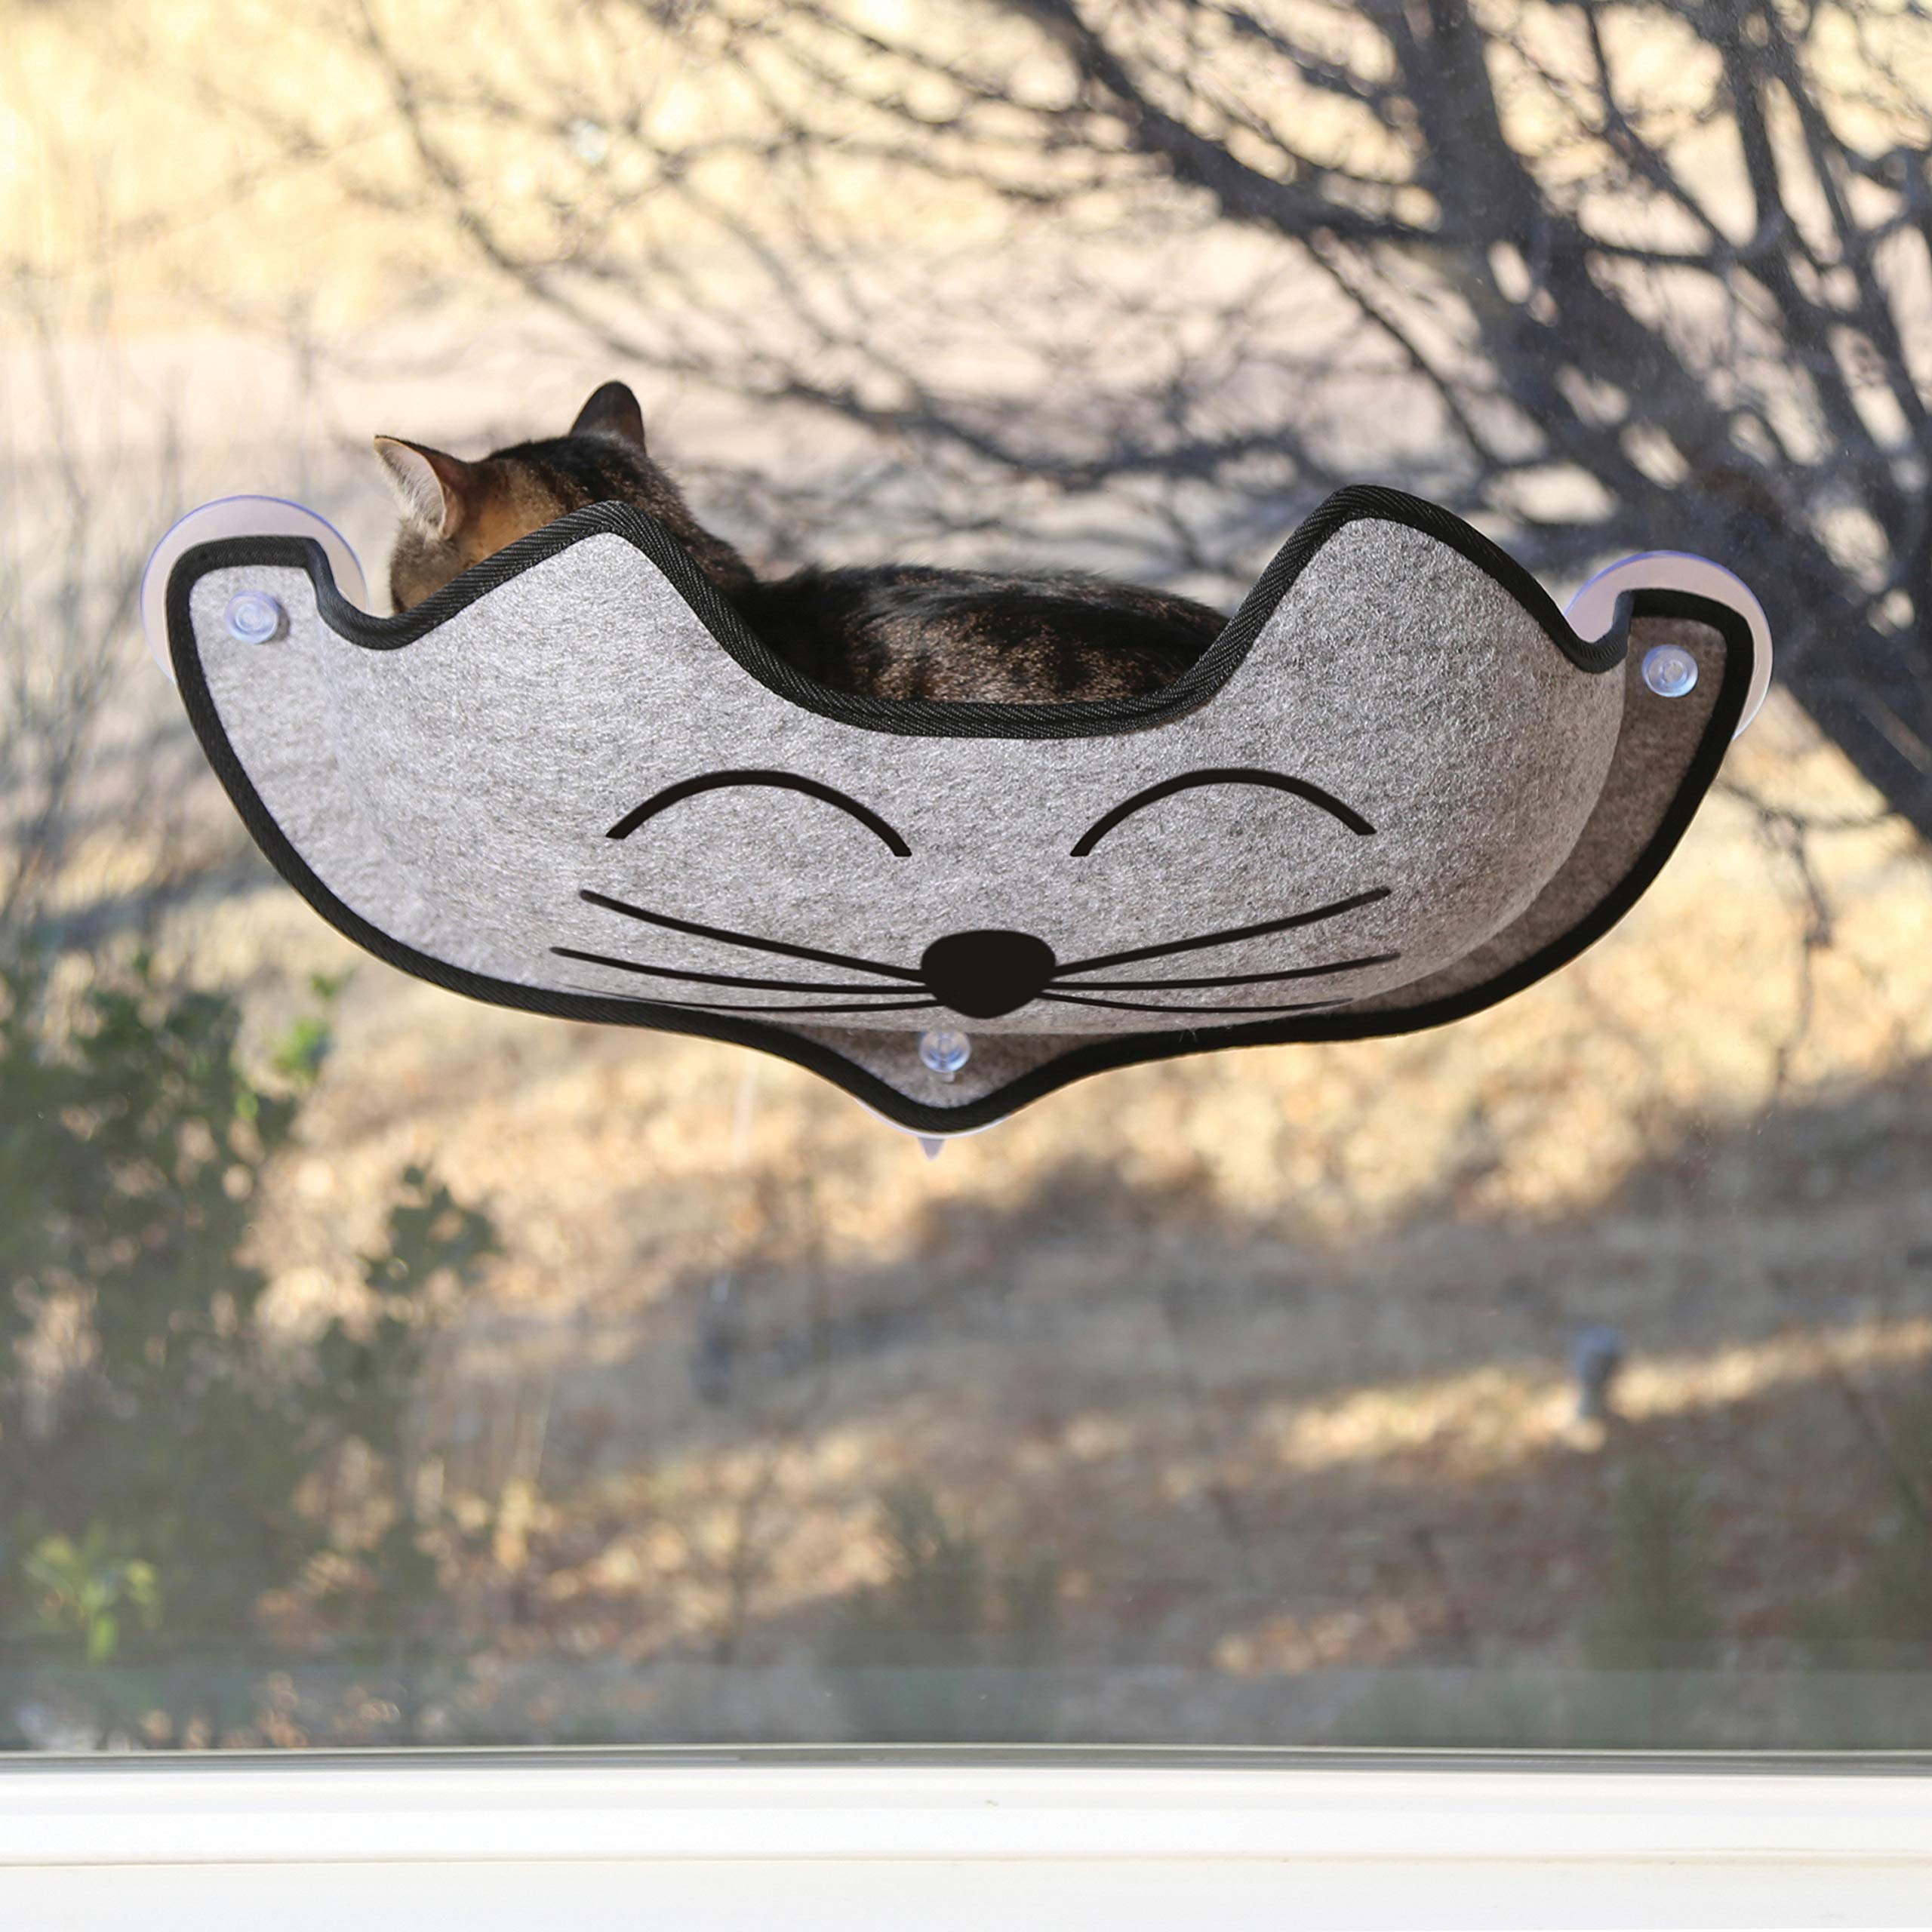 Mount Window Bed Kitty Sill Gray with Kitty Face